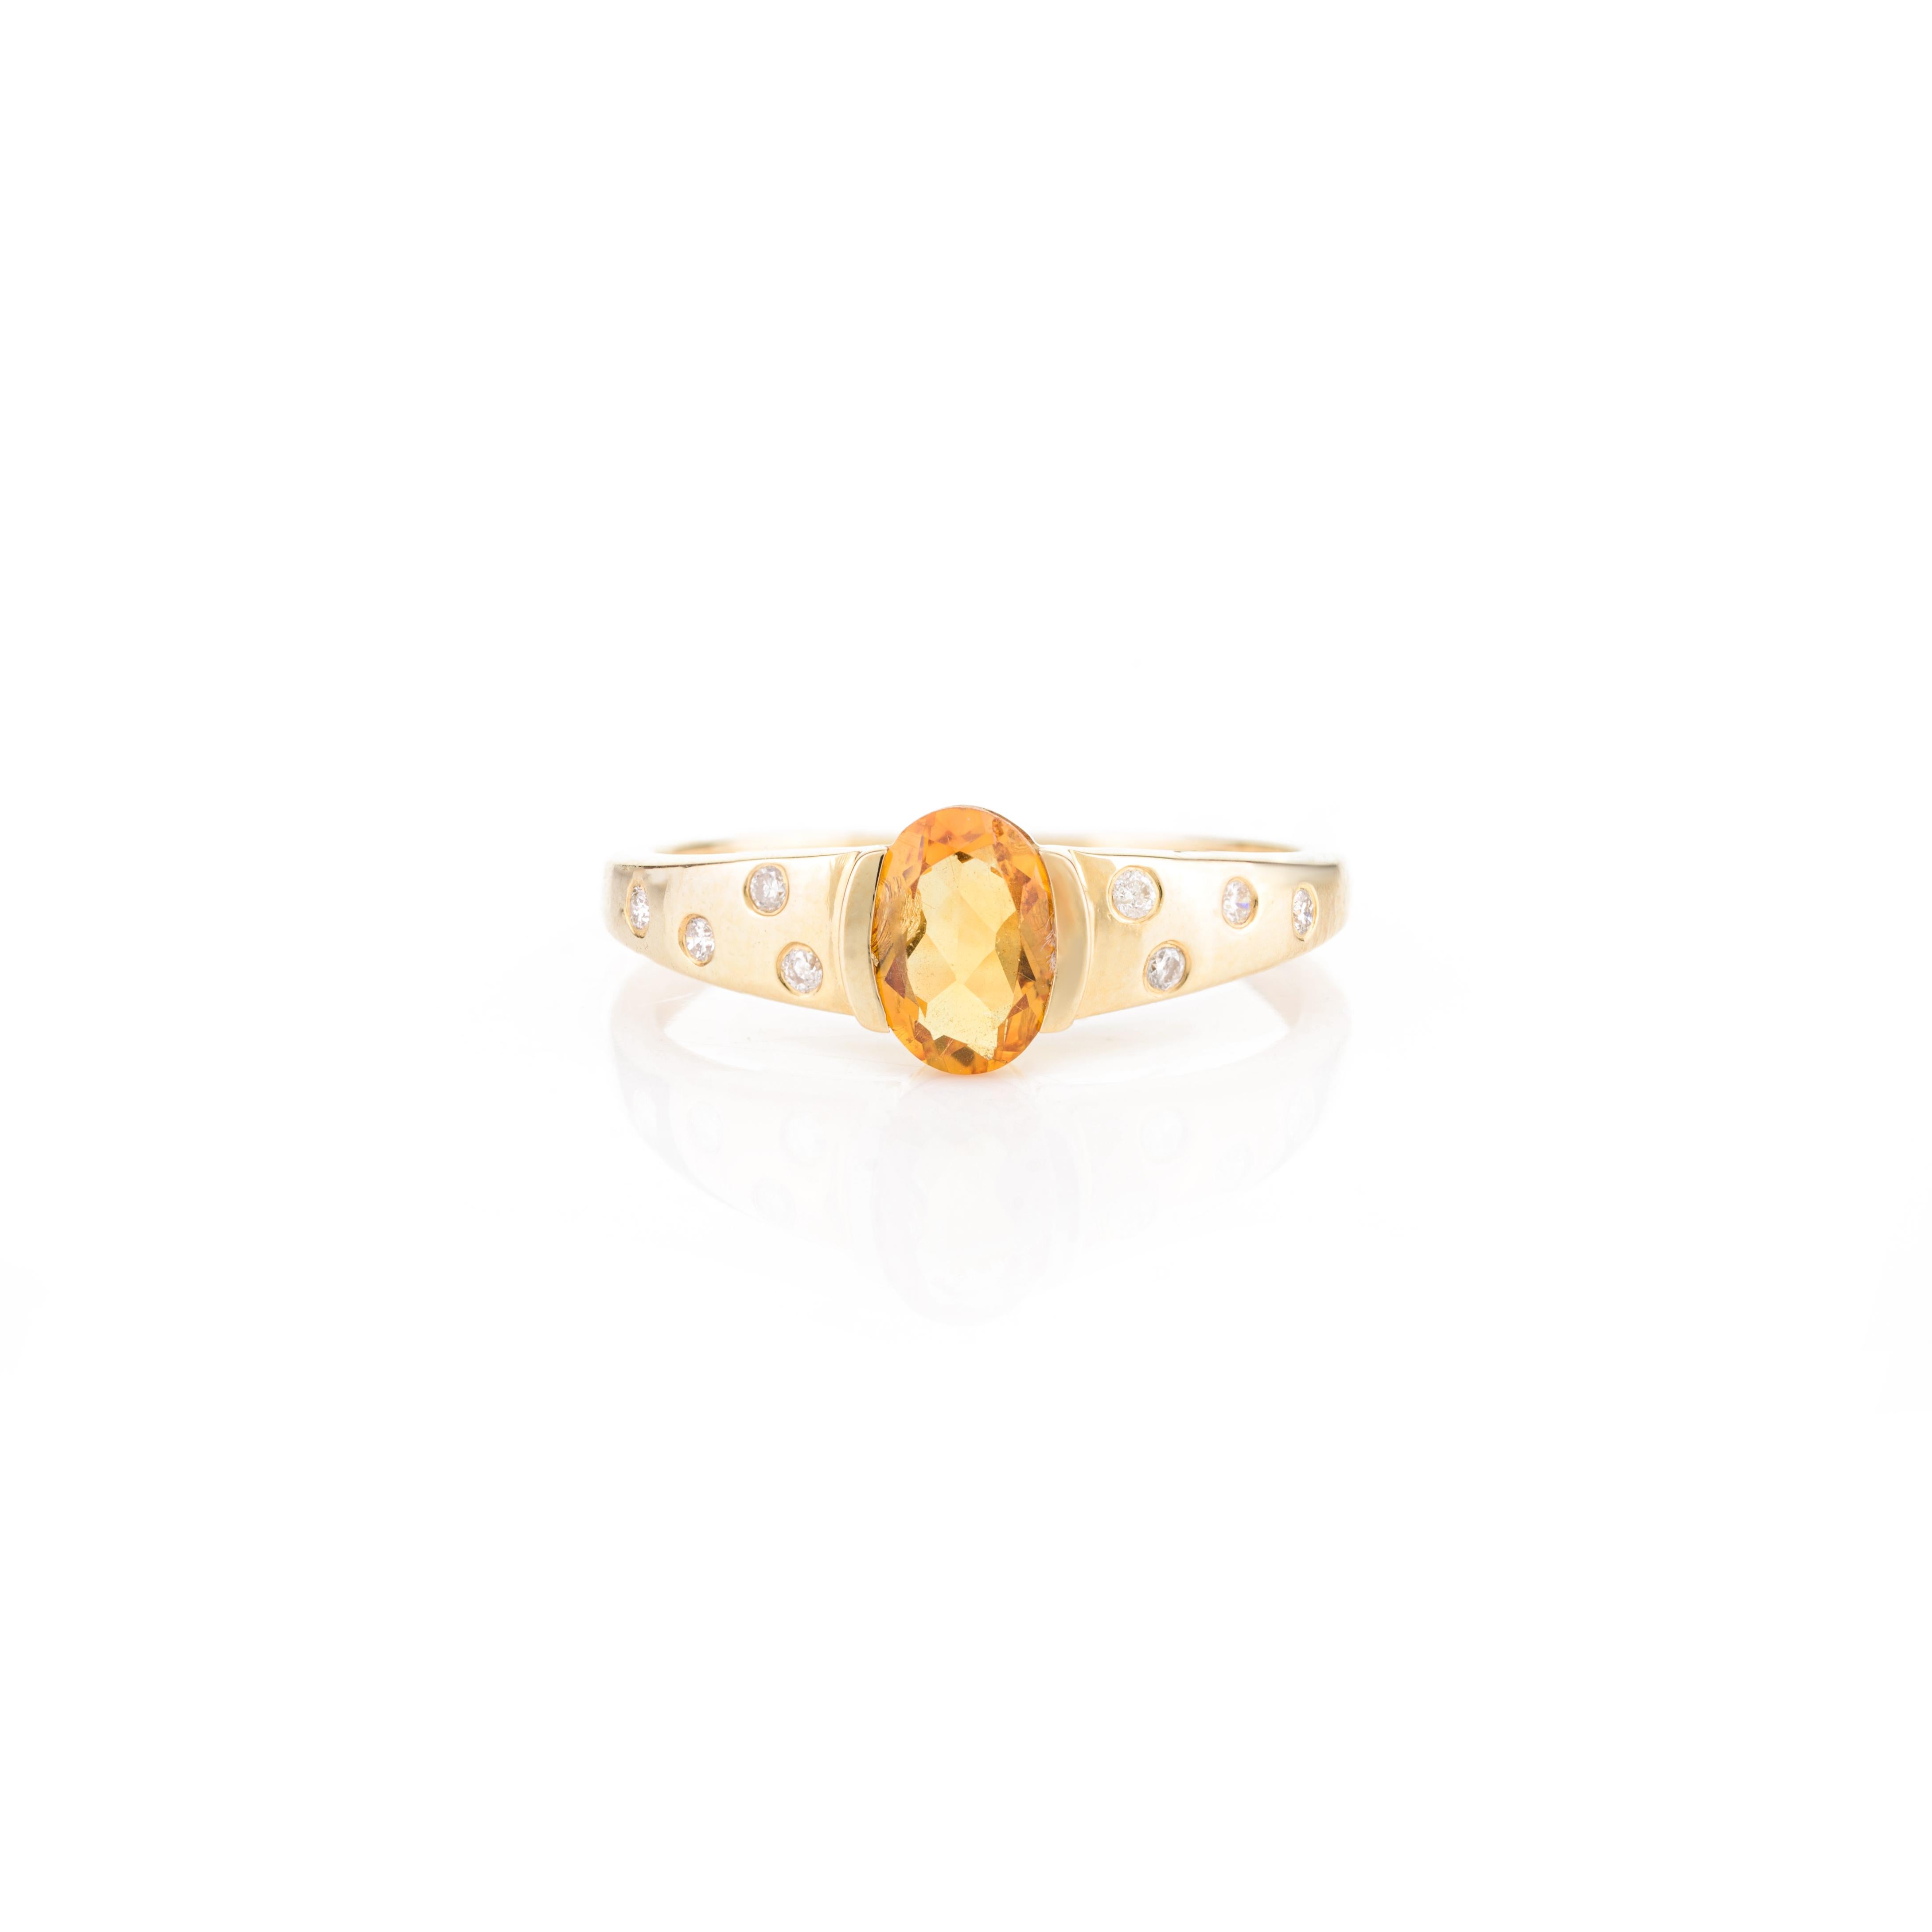 For Sale:  Unisex Natural Citrine and Diamond Engagement Ring in 14k Solid Yellow Gold 6